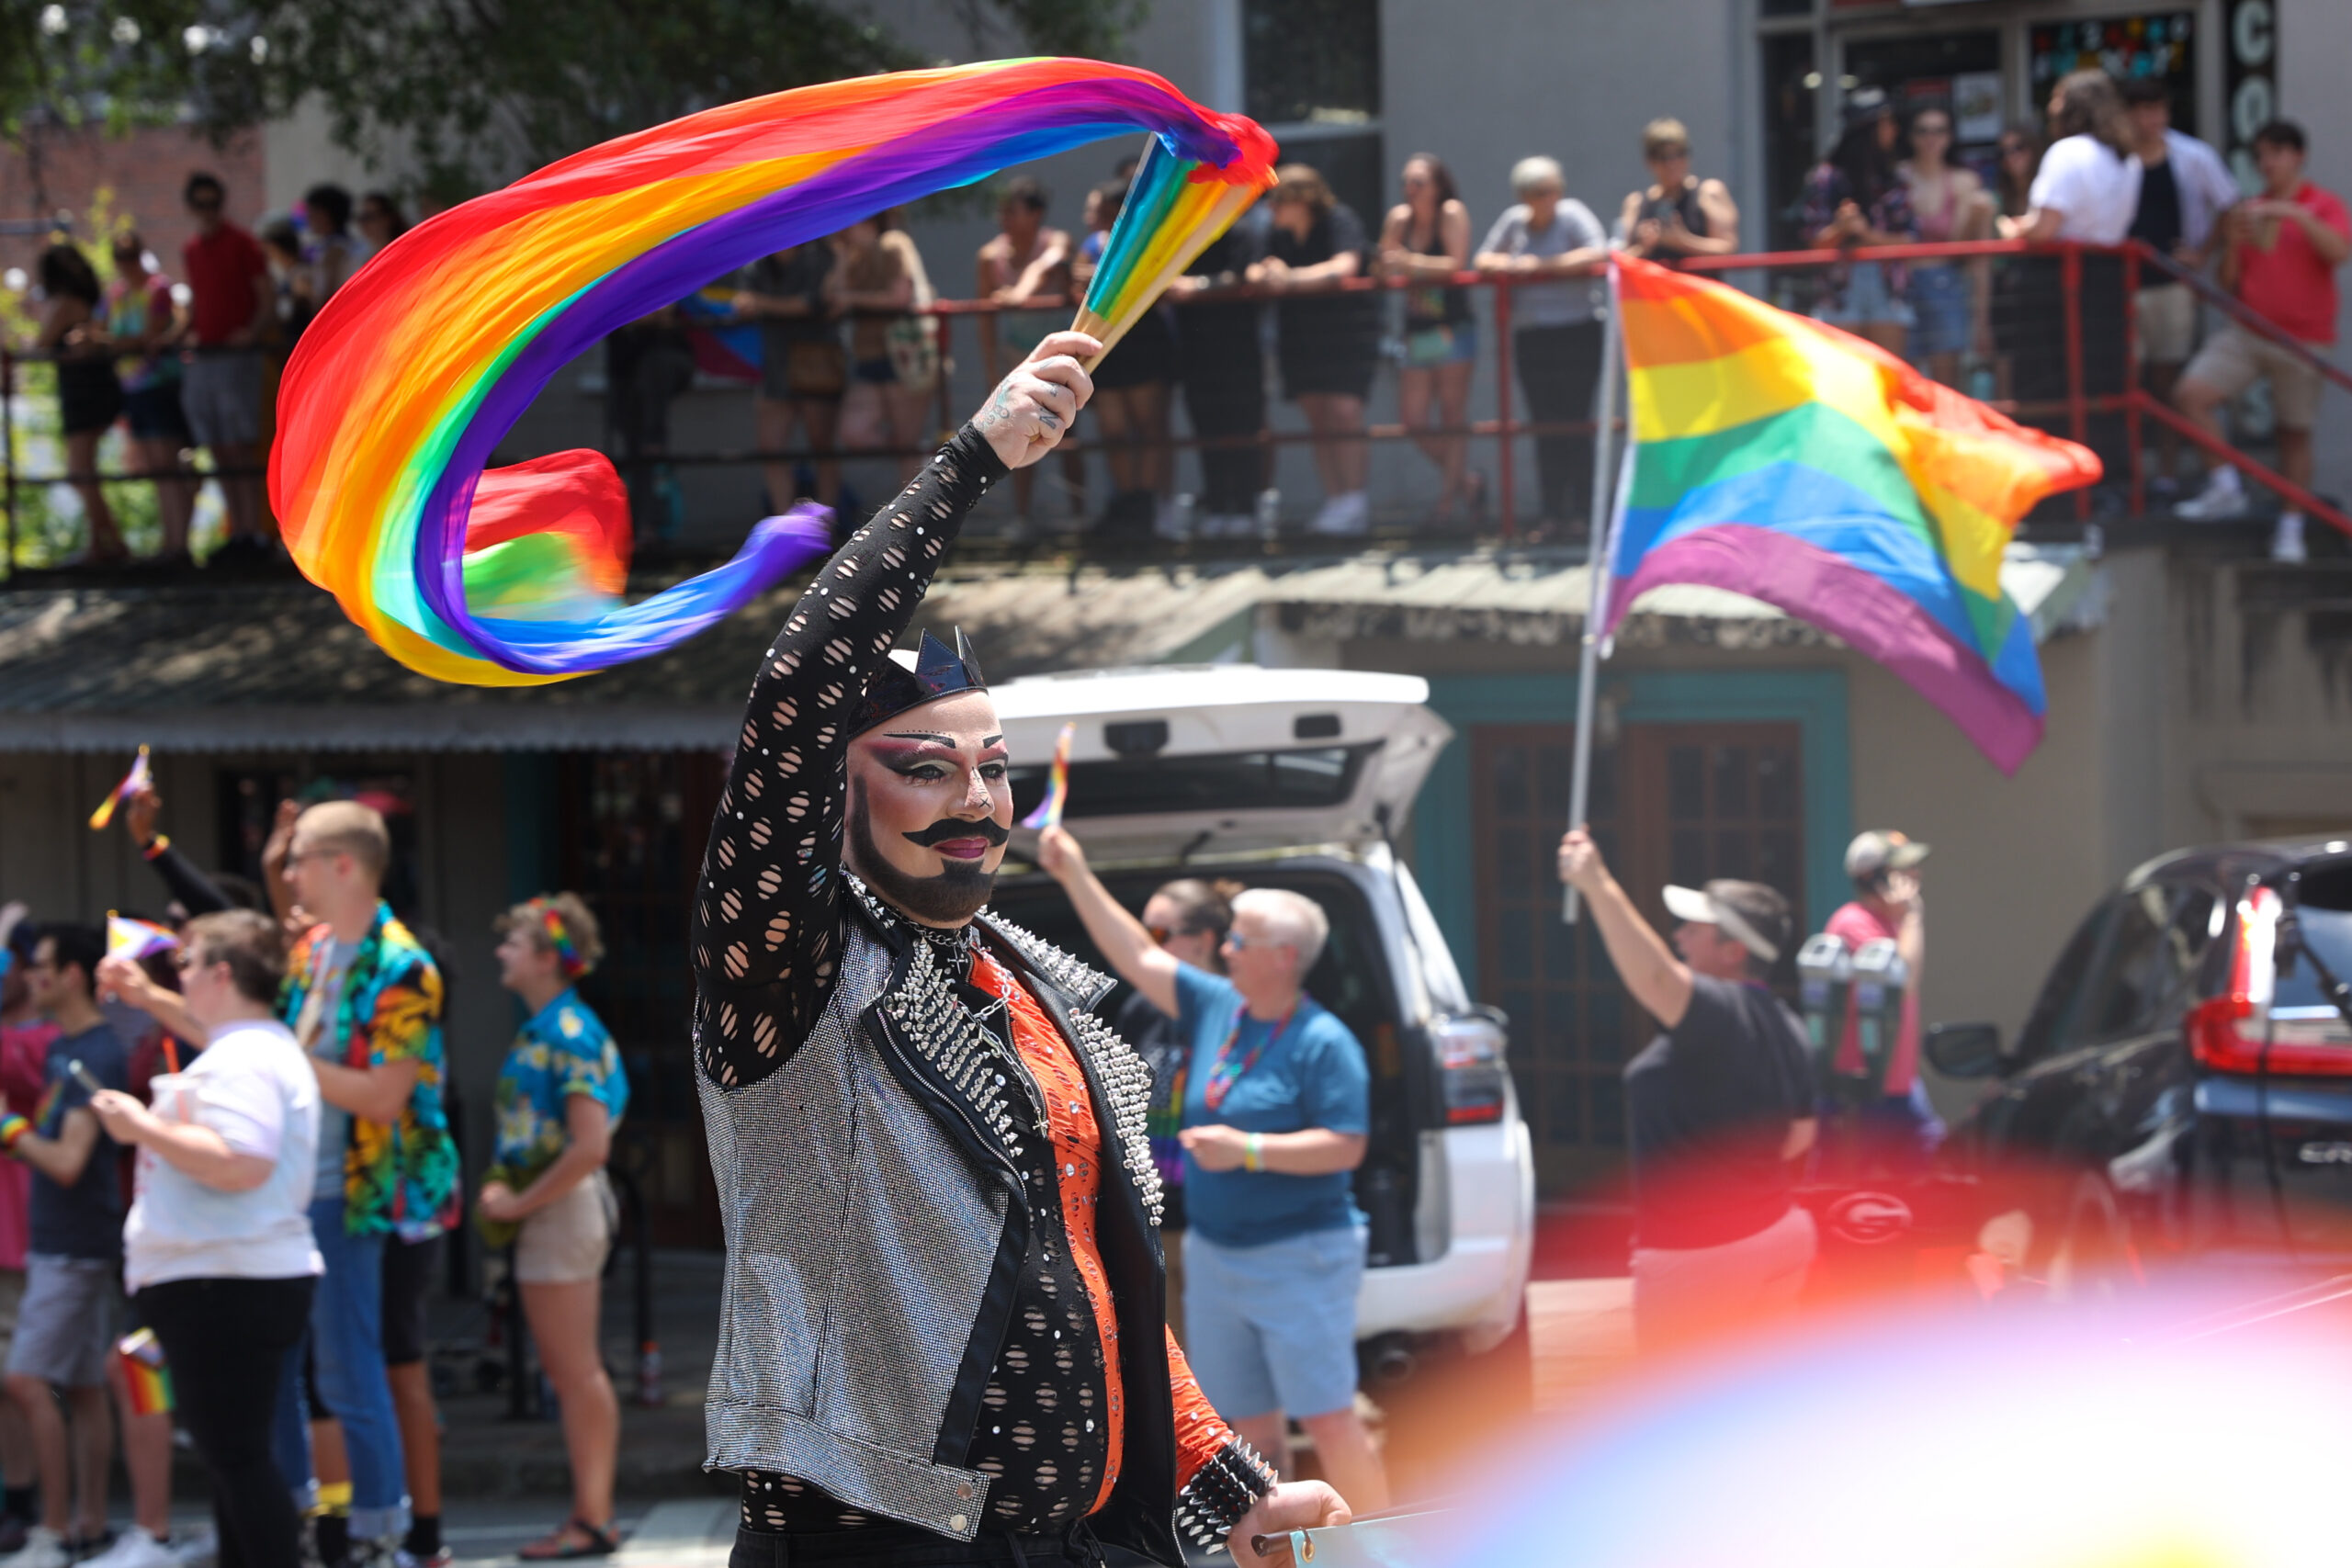 “Colourful, welcoming and alive”. Visit Greece introduces new section promoting Greece as a prominent LGBTQ+ friendly destination